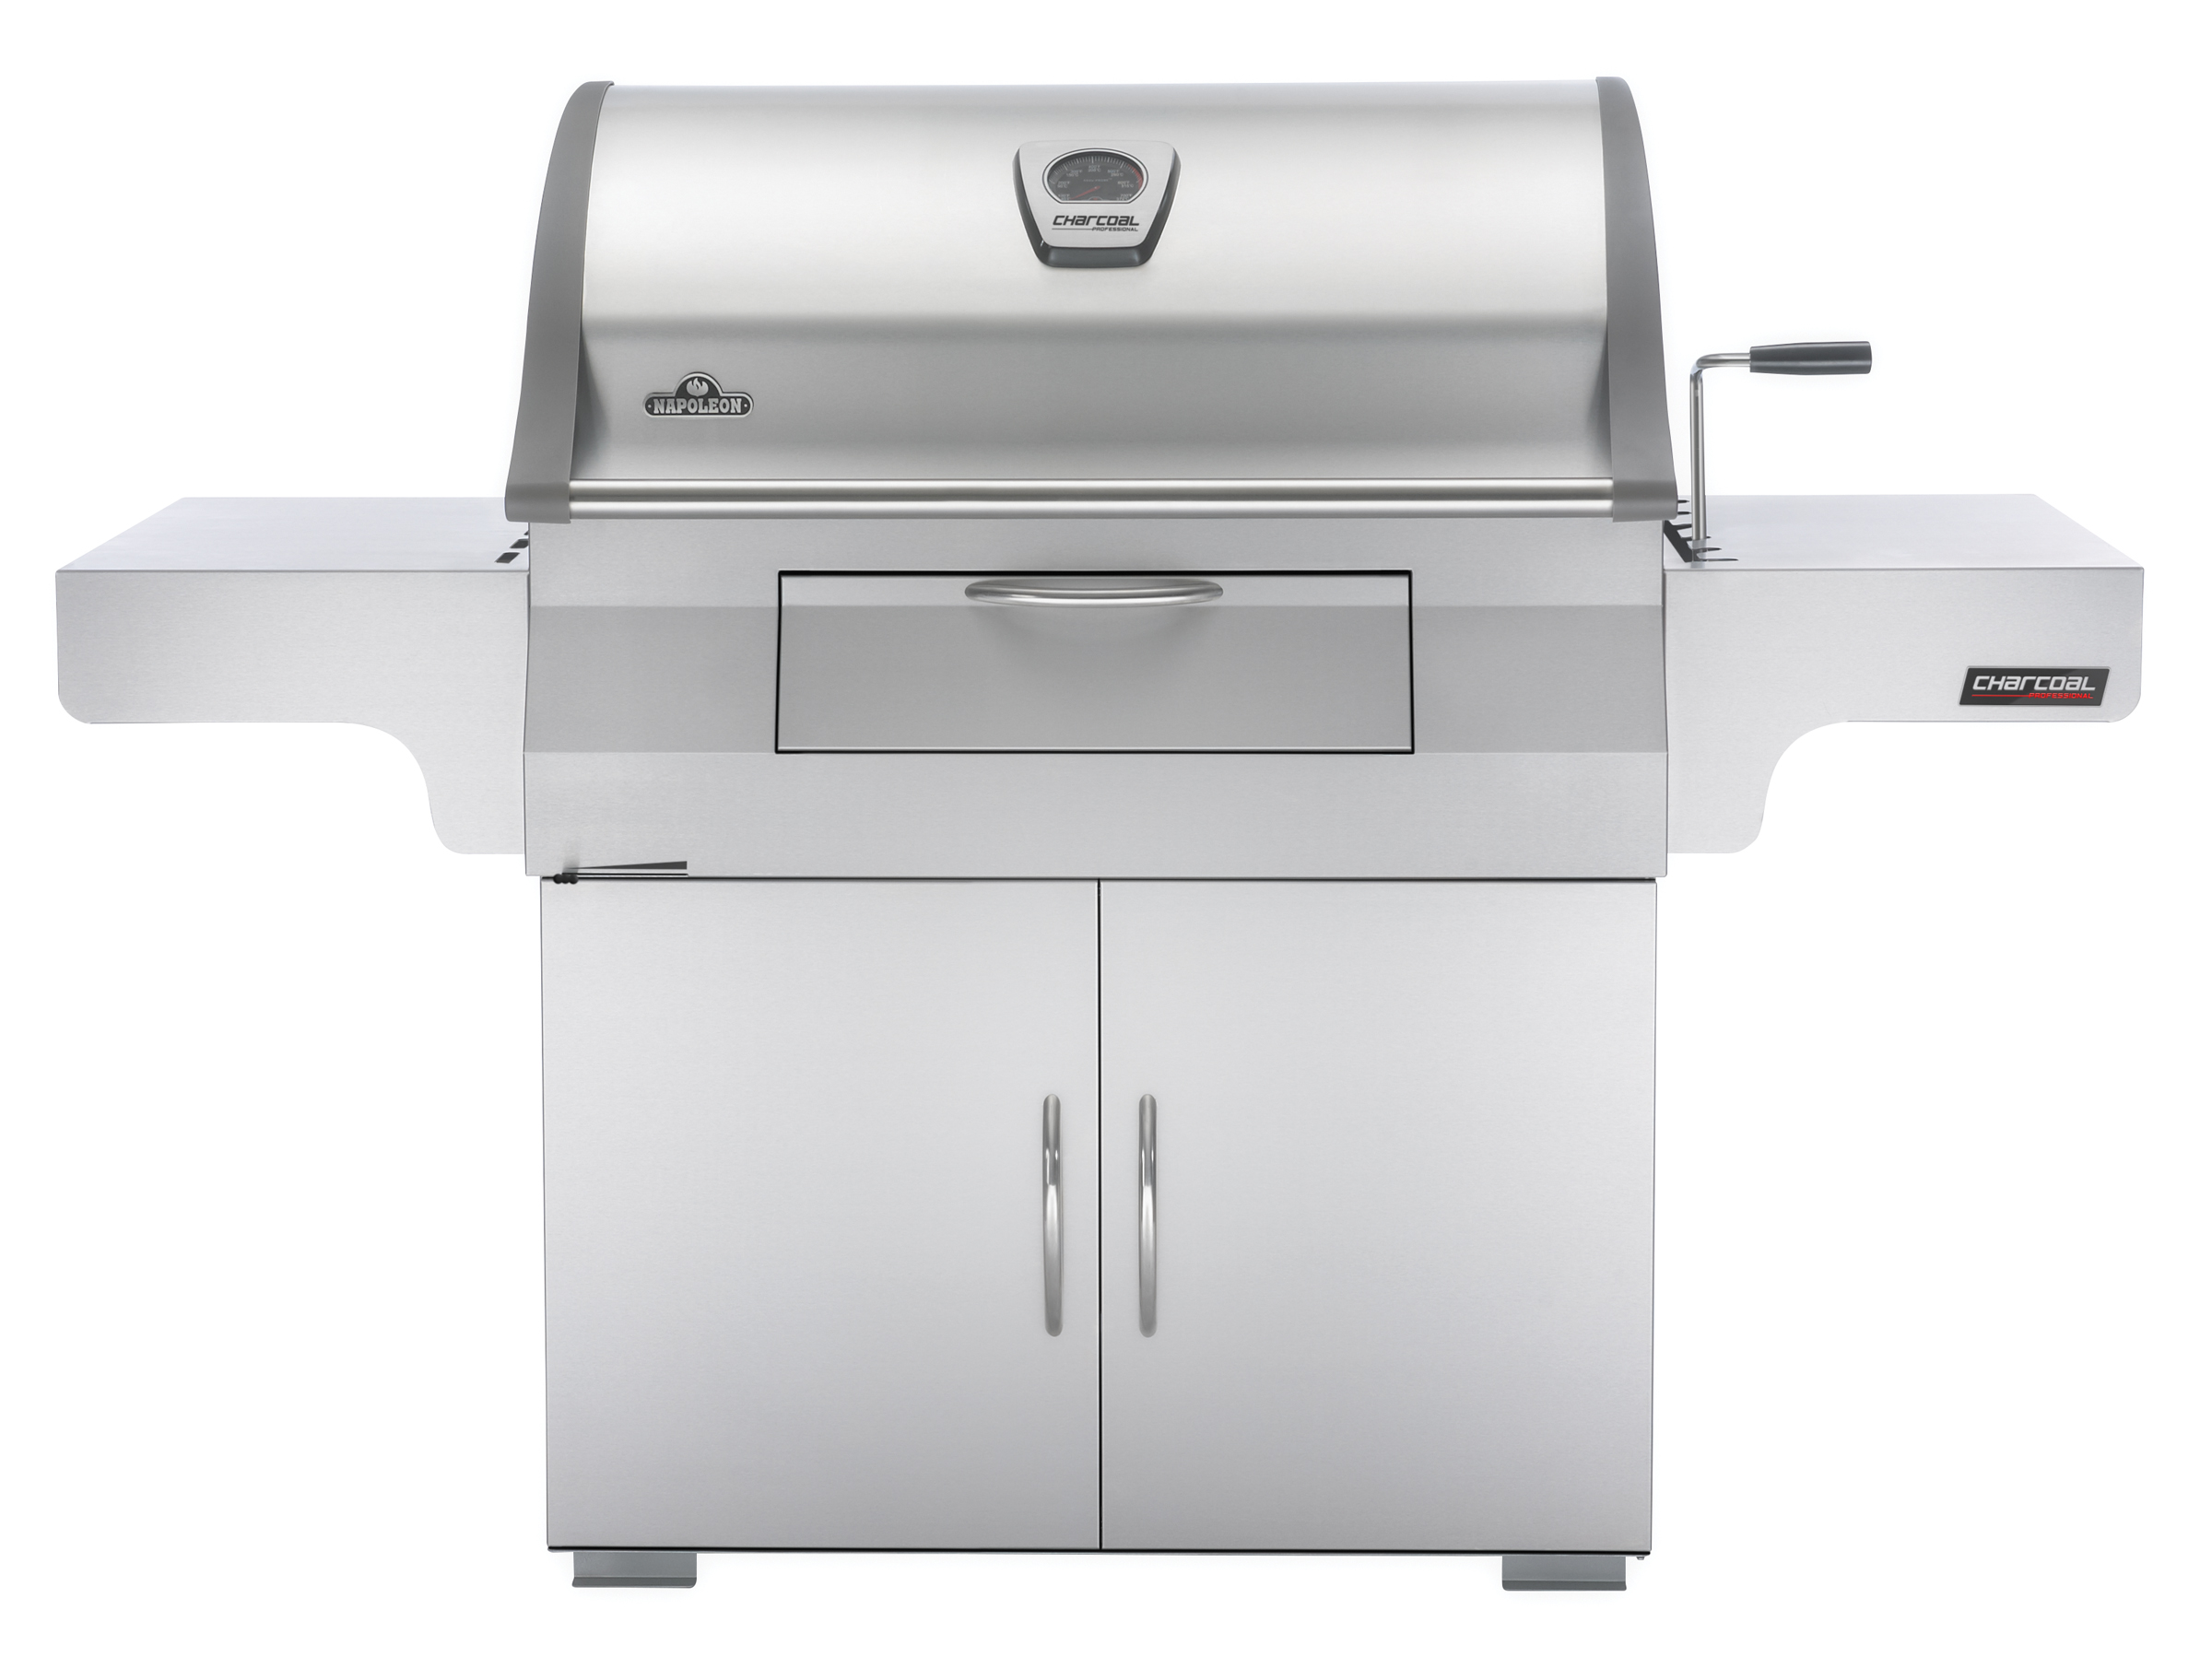 Charcoal Professional Grill, Stainless Steel - PRO605CSS - image 1 of 7